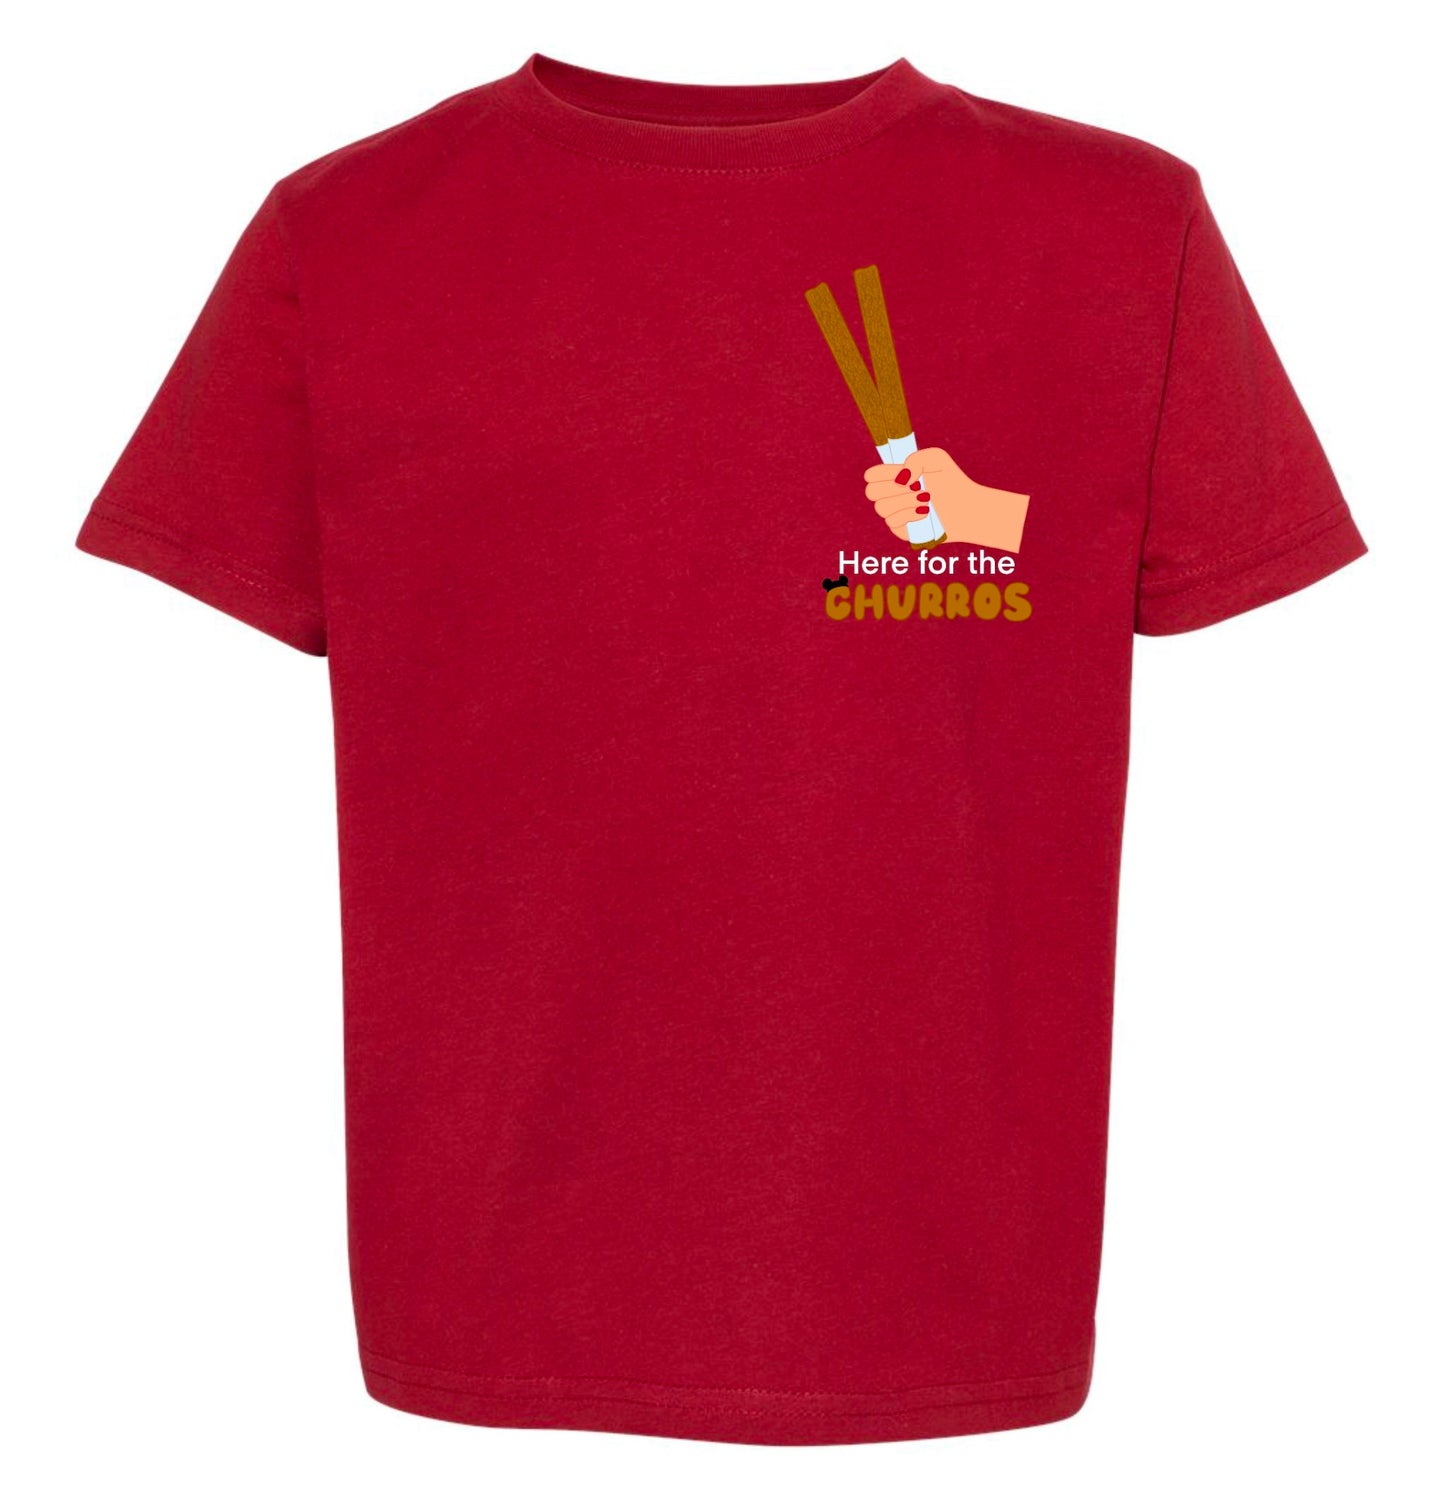 Here for the Churros Kids Tee